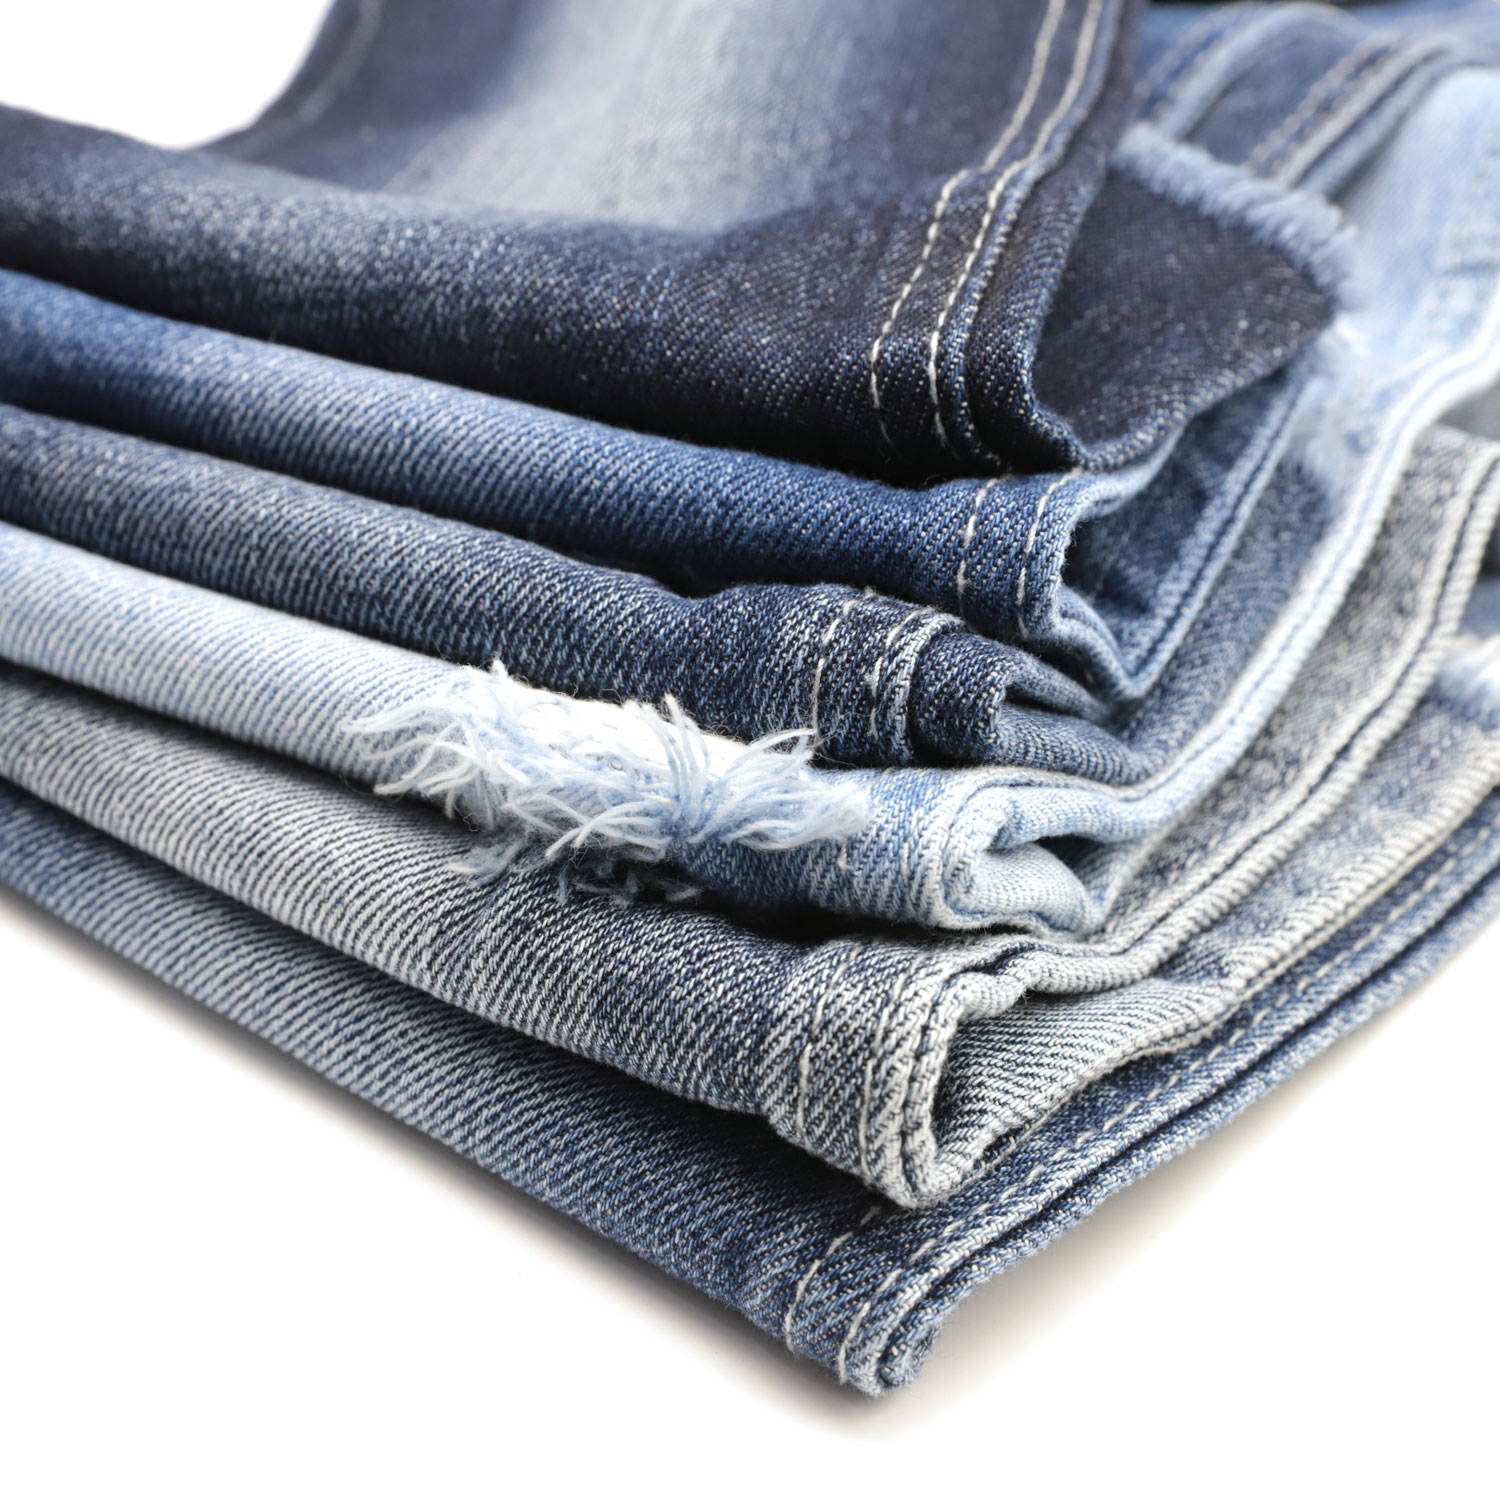 Important Things to Consider Before Buying a Denim Jeans Material 1